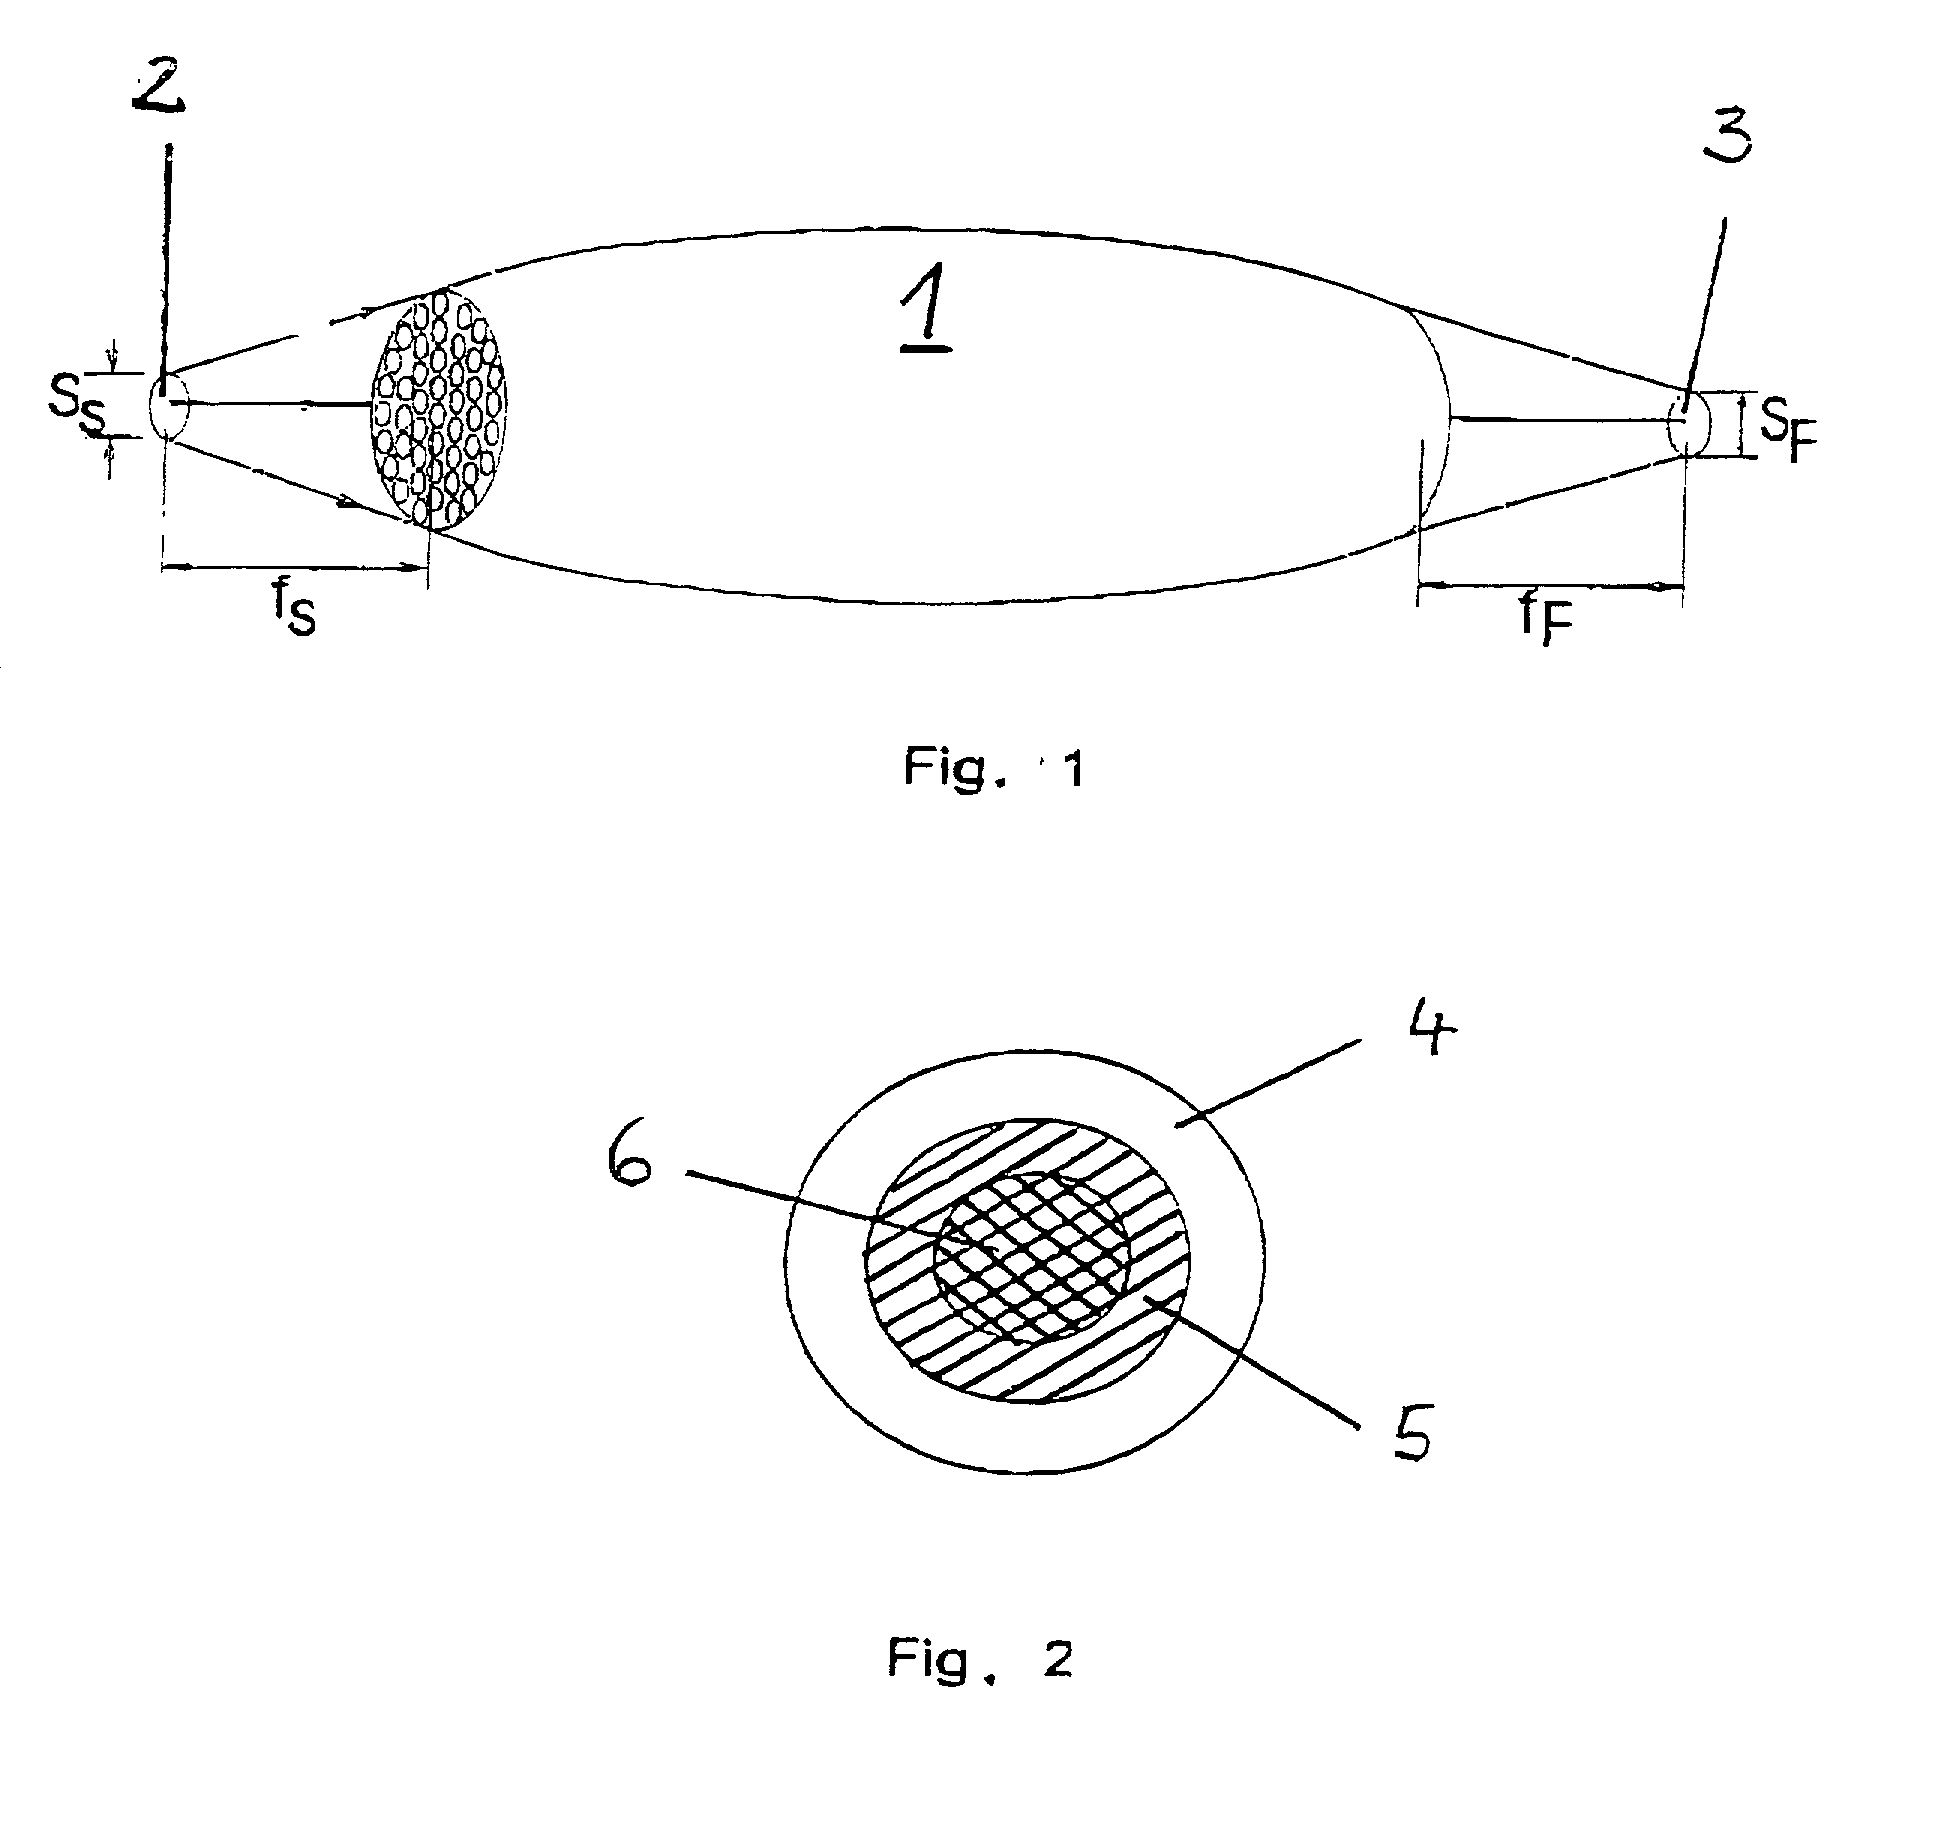 Capillary optical element with a complex structure of capillaries and a method for its manufacture